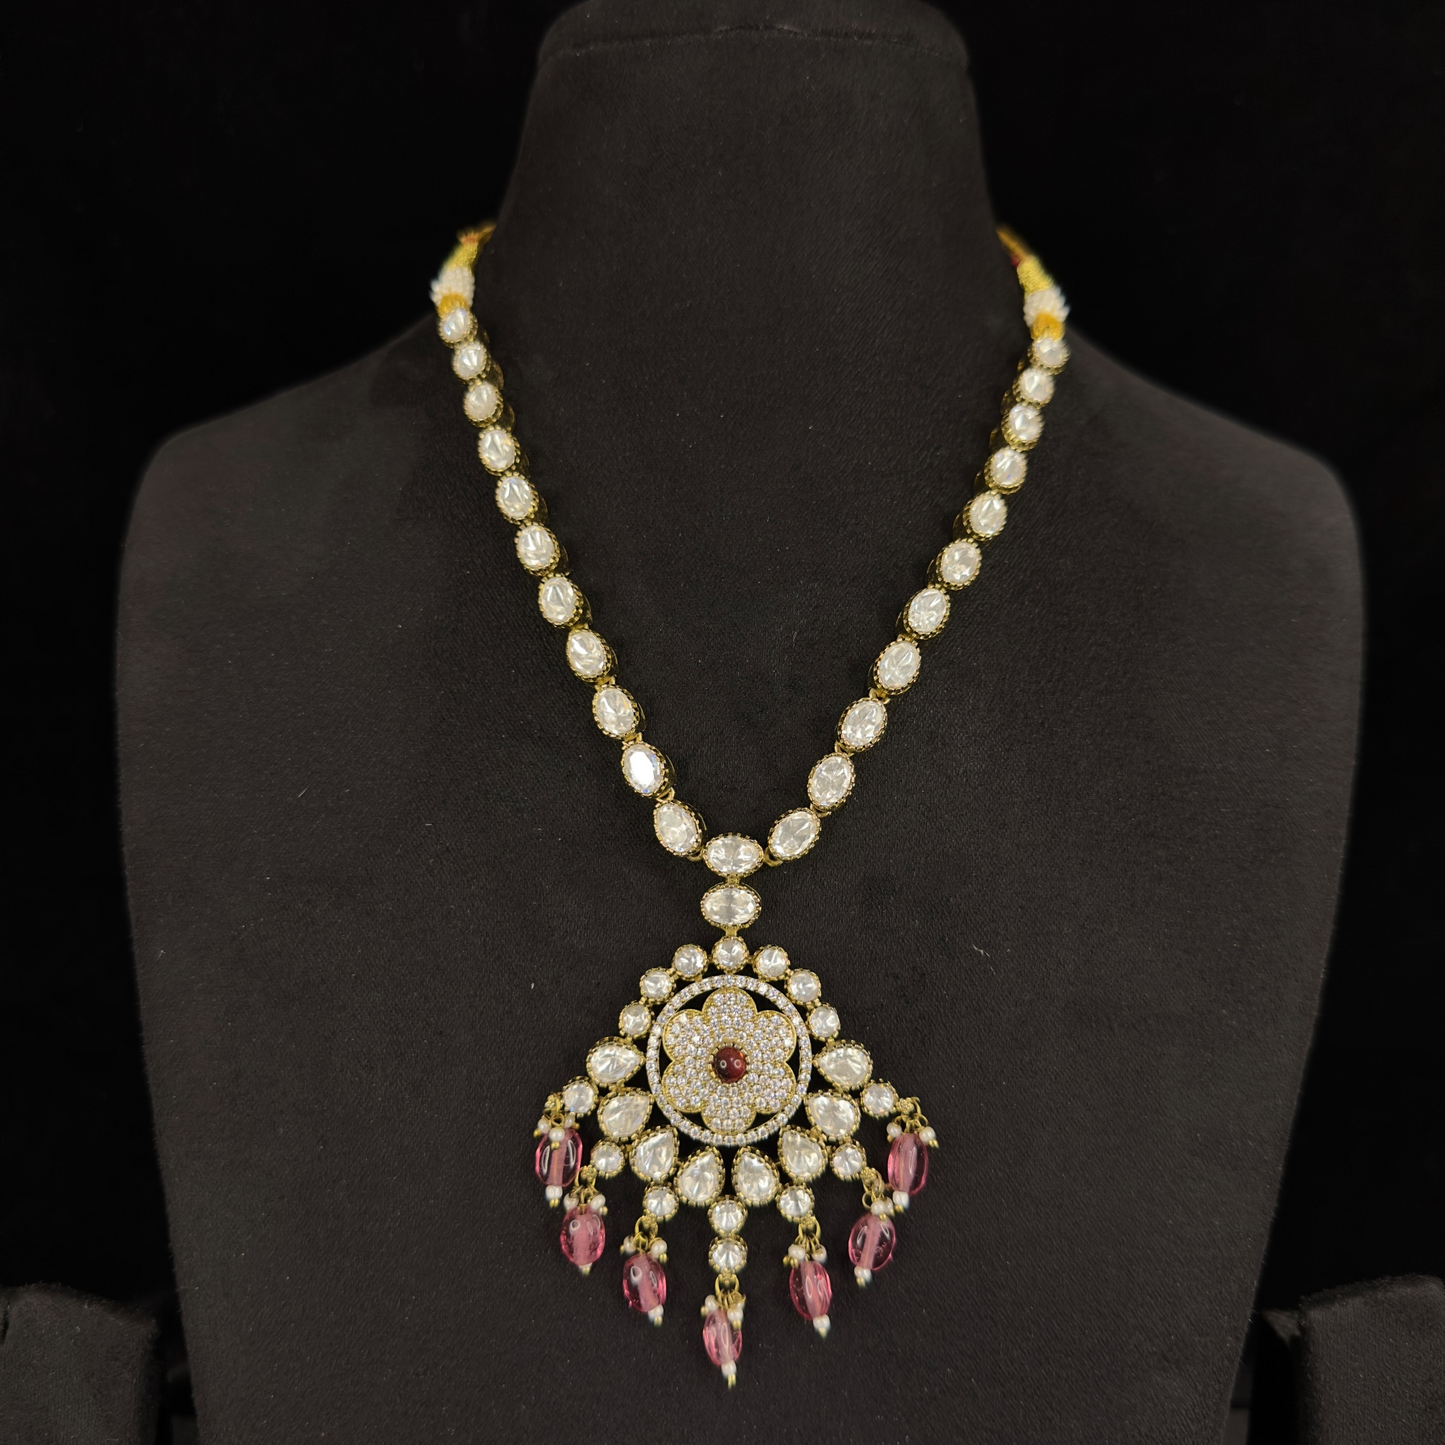 Victorian Zircon Necklace with Pendant & Earrings. This Victorian Jewellery is available in Red & Green colour variants. 